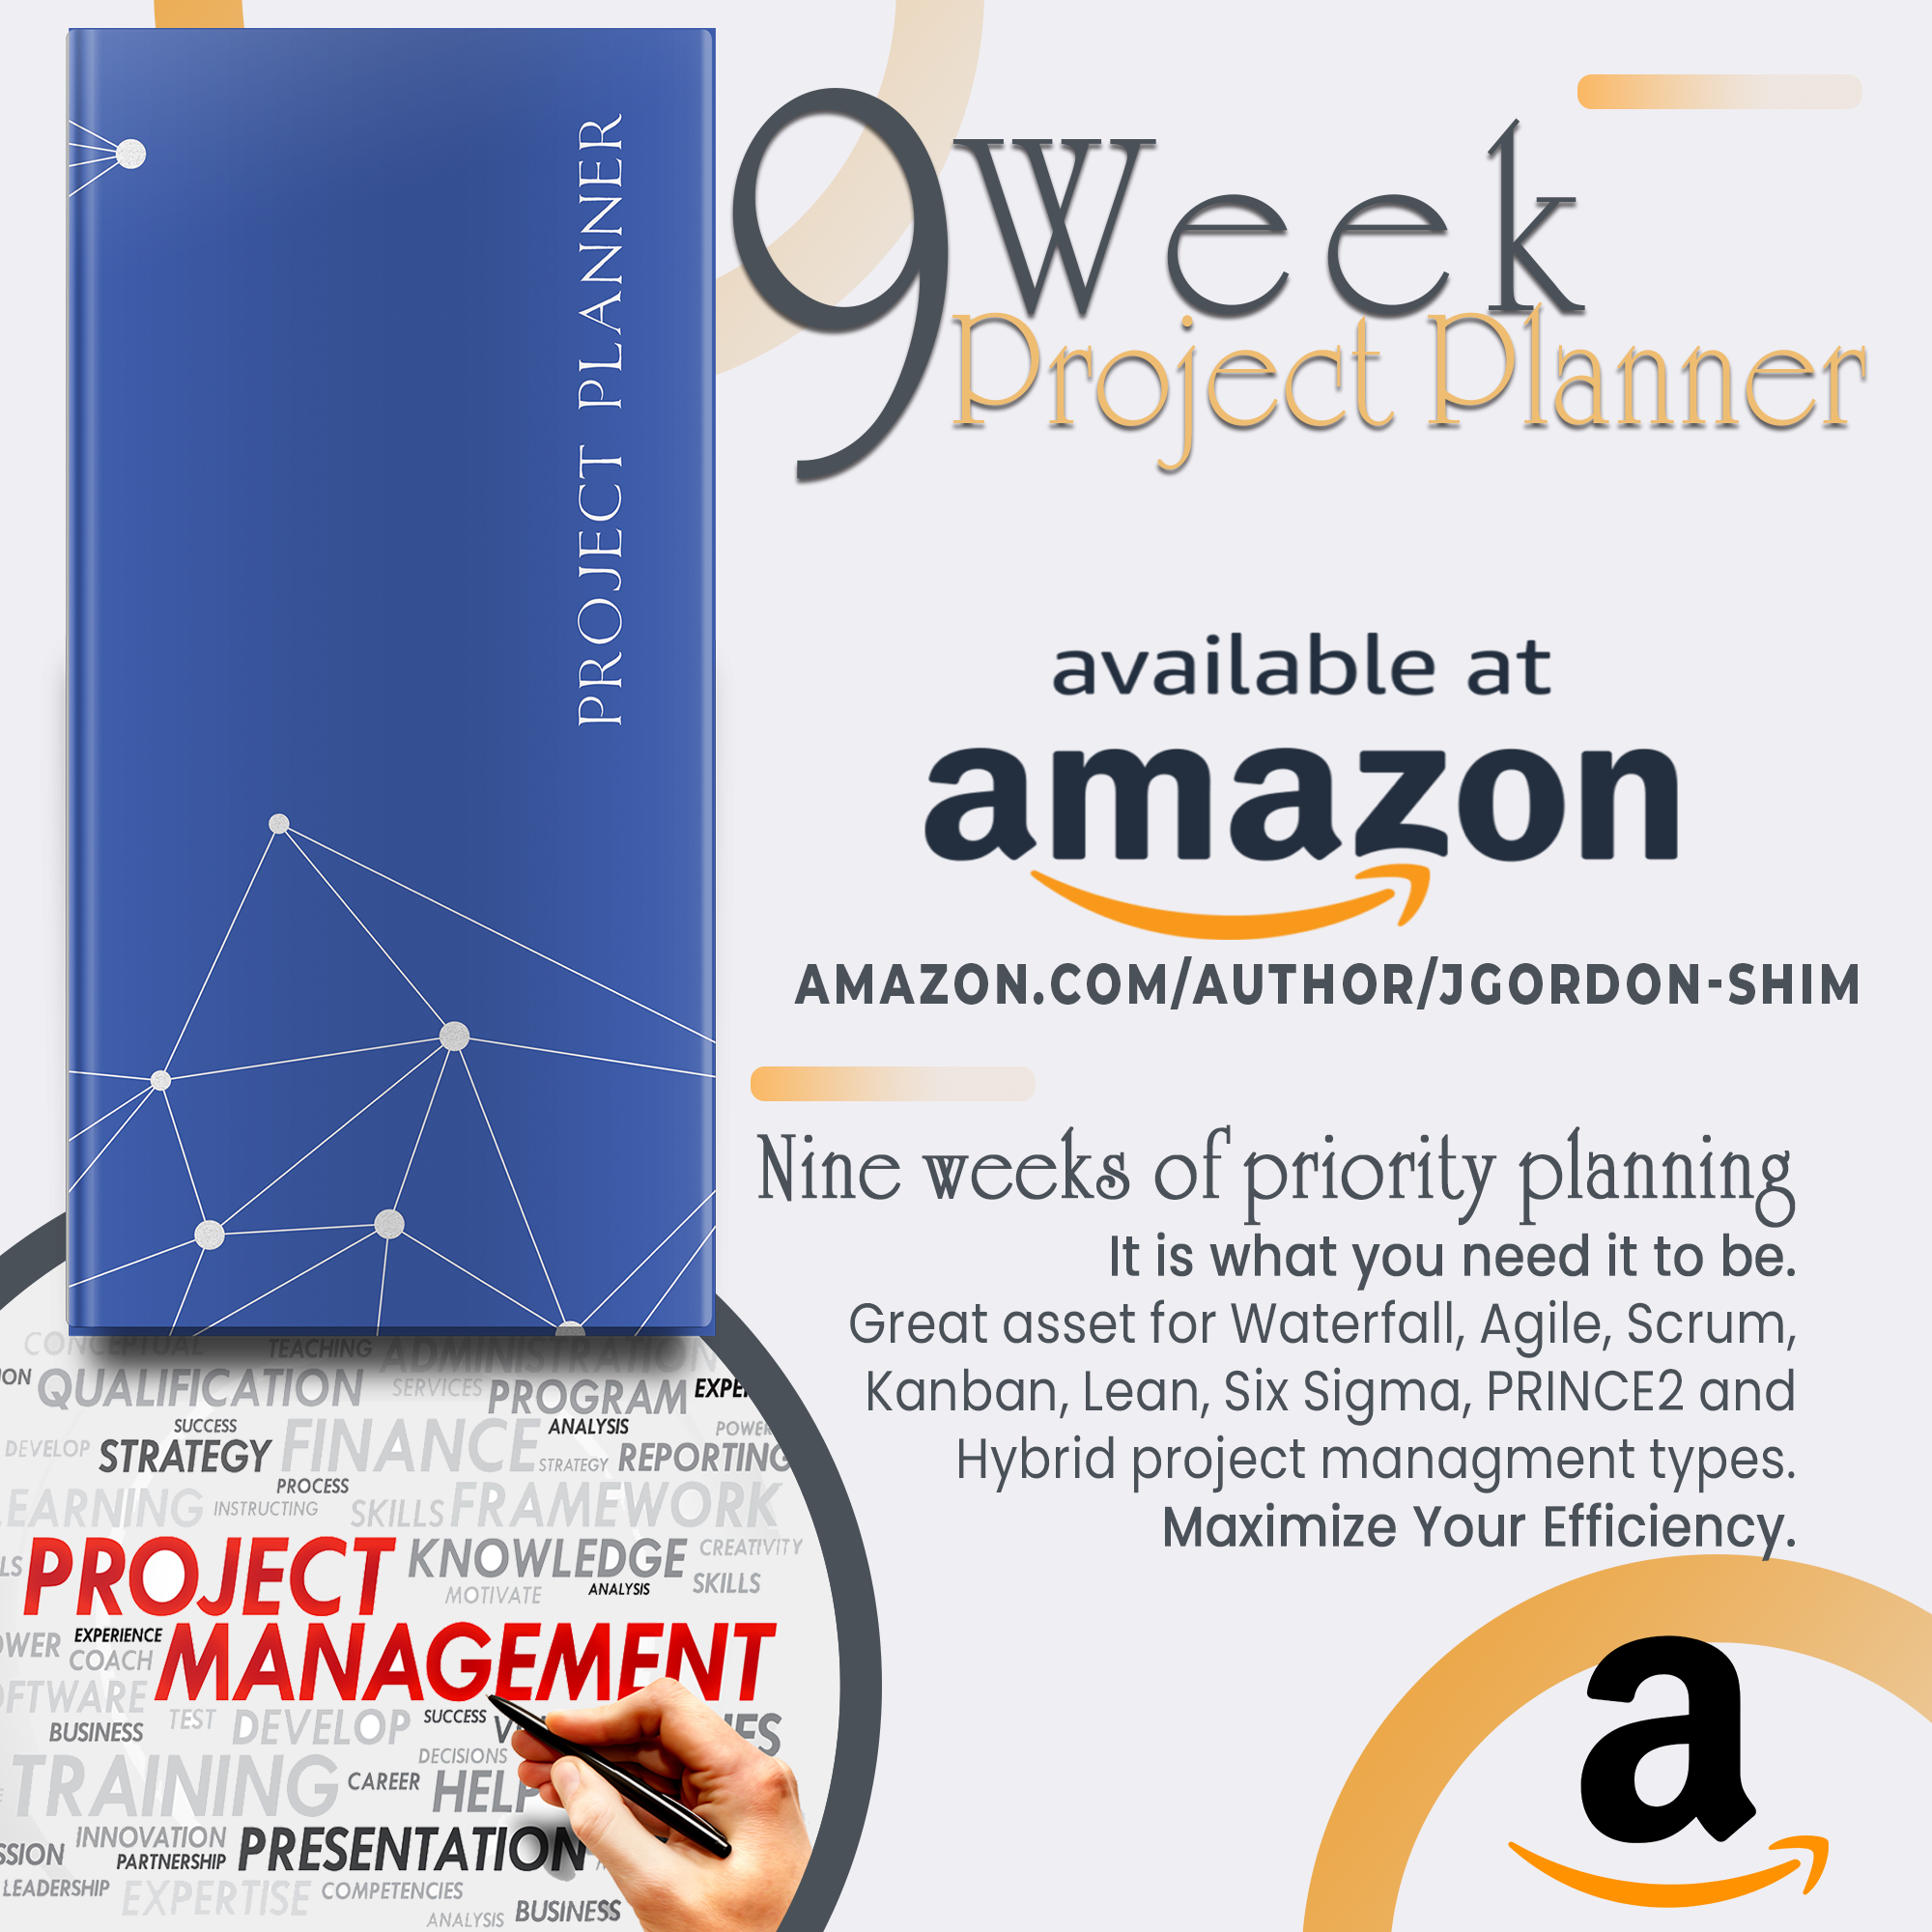 9 Week Project Planner at Amazon